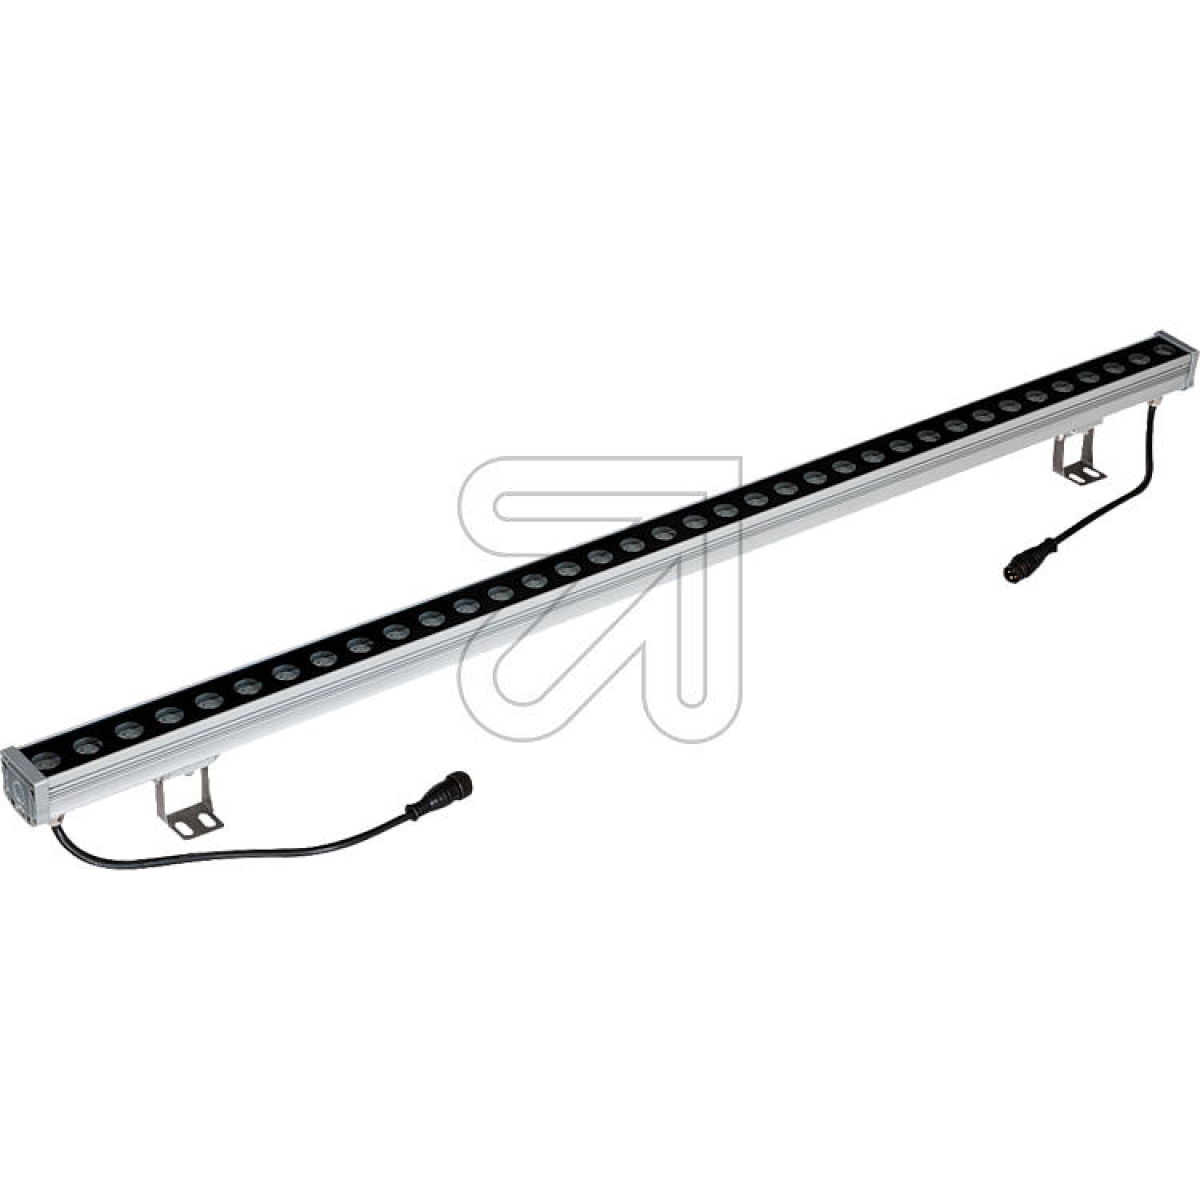 EVNRGB LED wall washer IP65 silver 36W P65243699Article-No: 624405